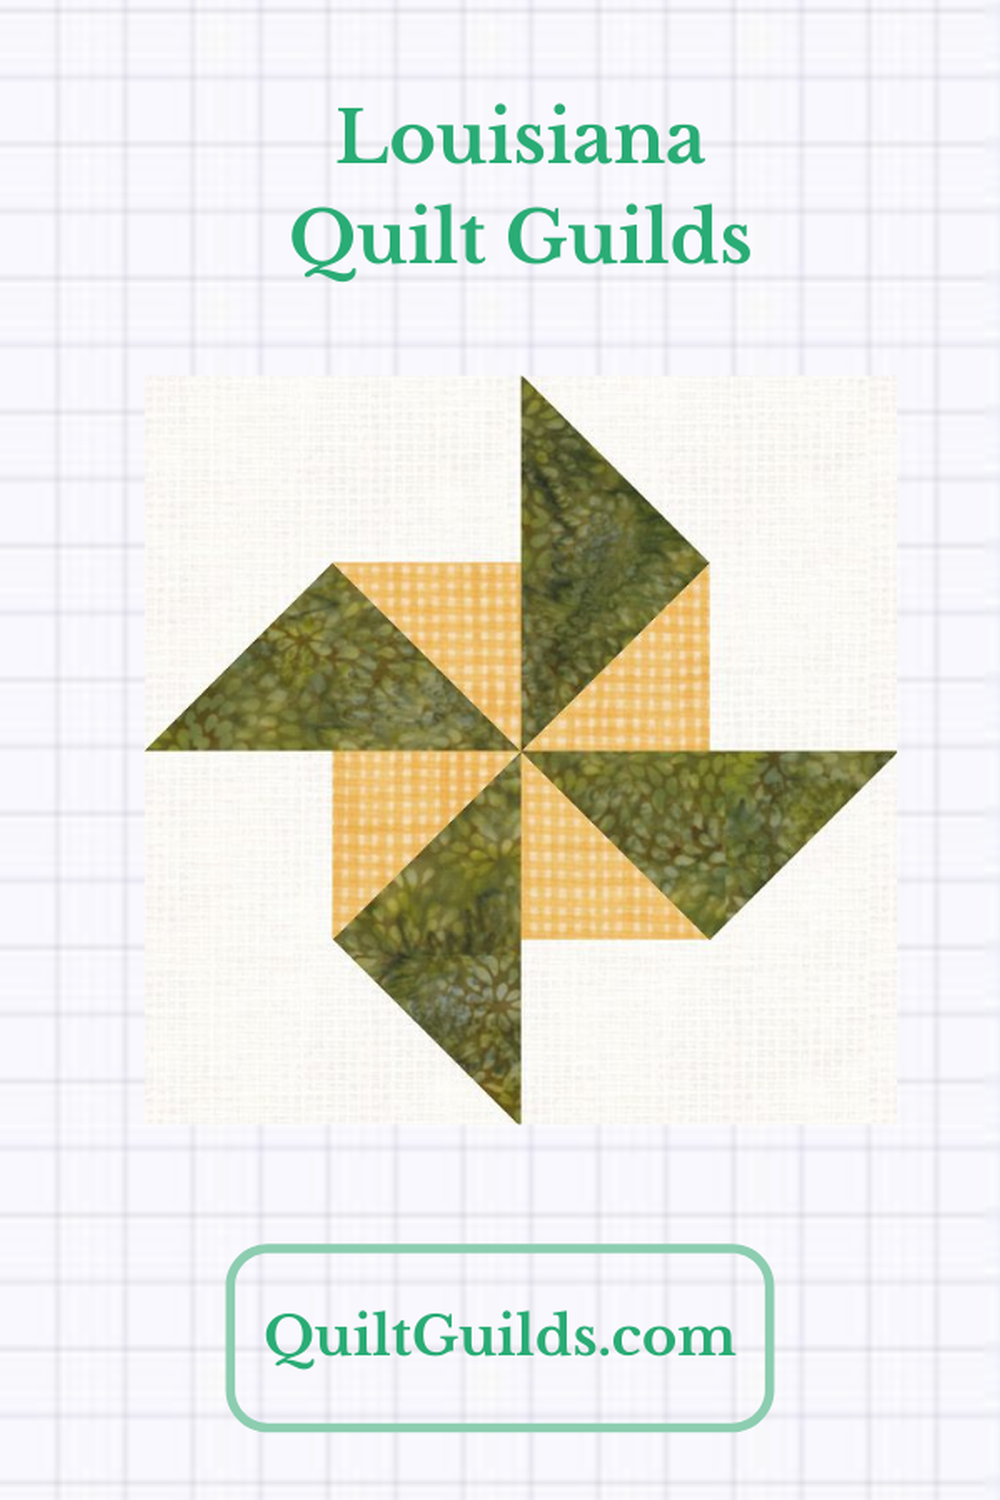 Louisiana Quilt Guilds - LA Quilting Guilds listed in alphabetical order by city